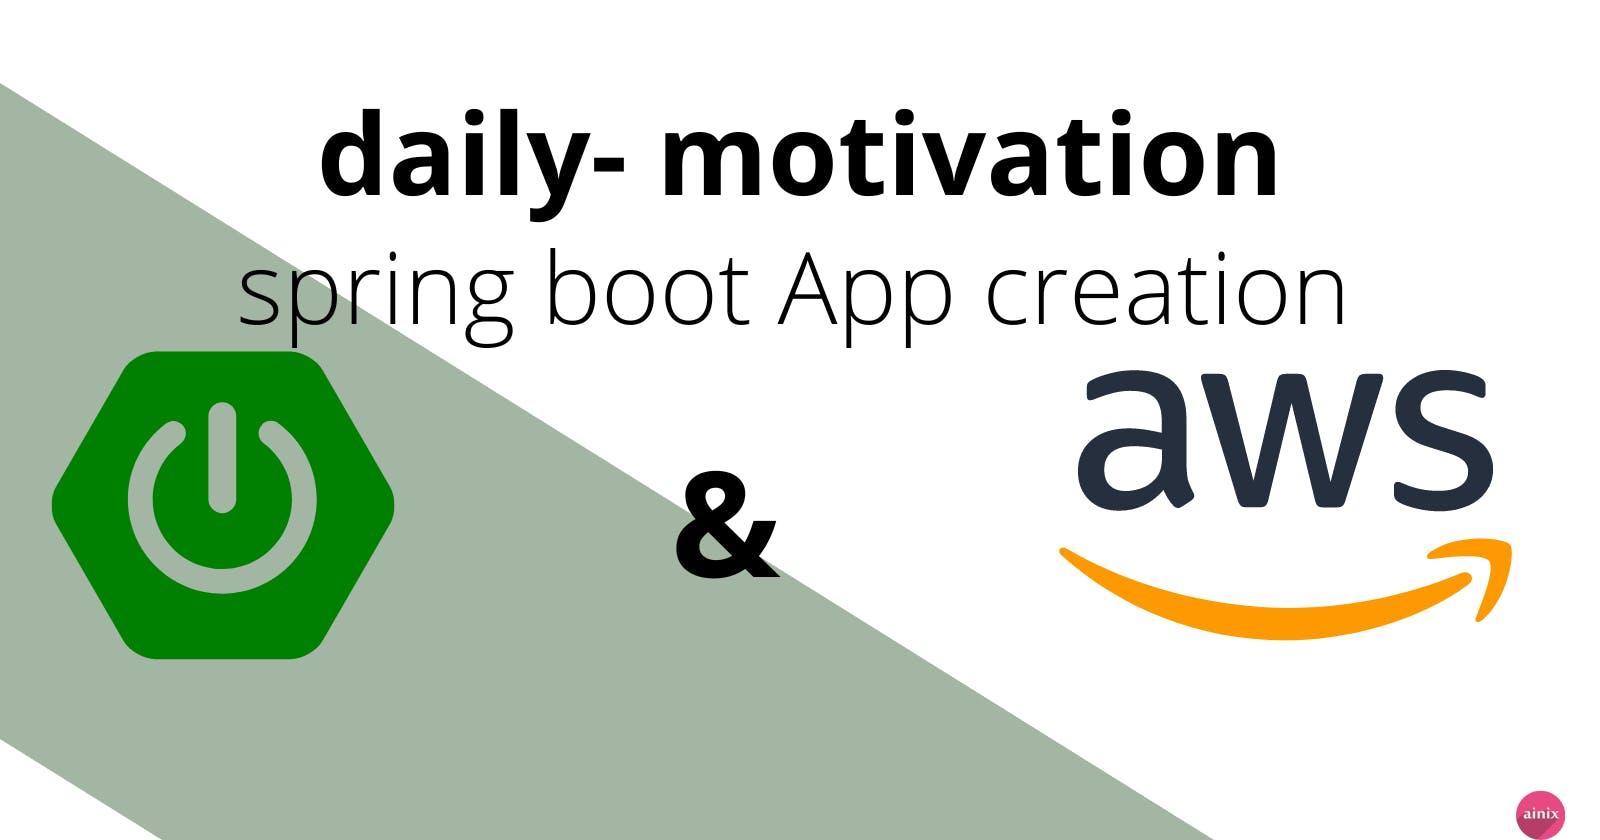 Daily-motivation: create spring boot application